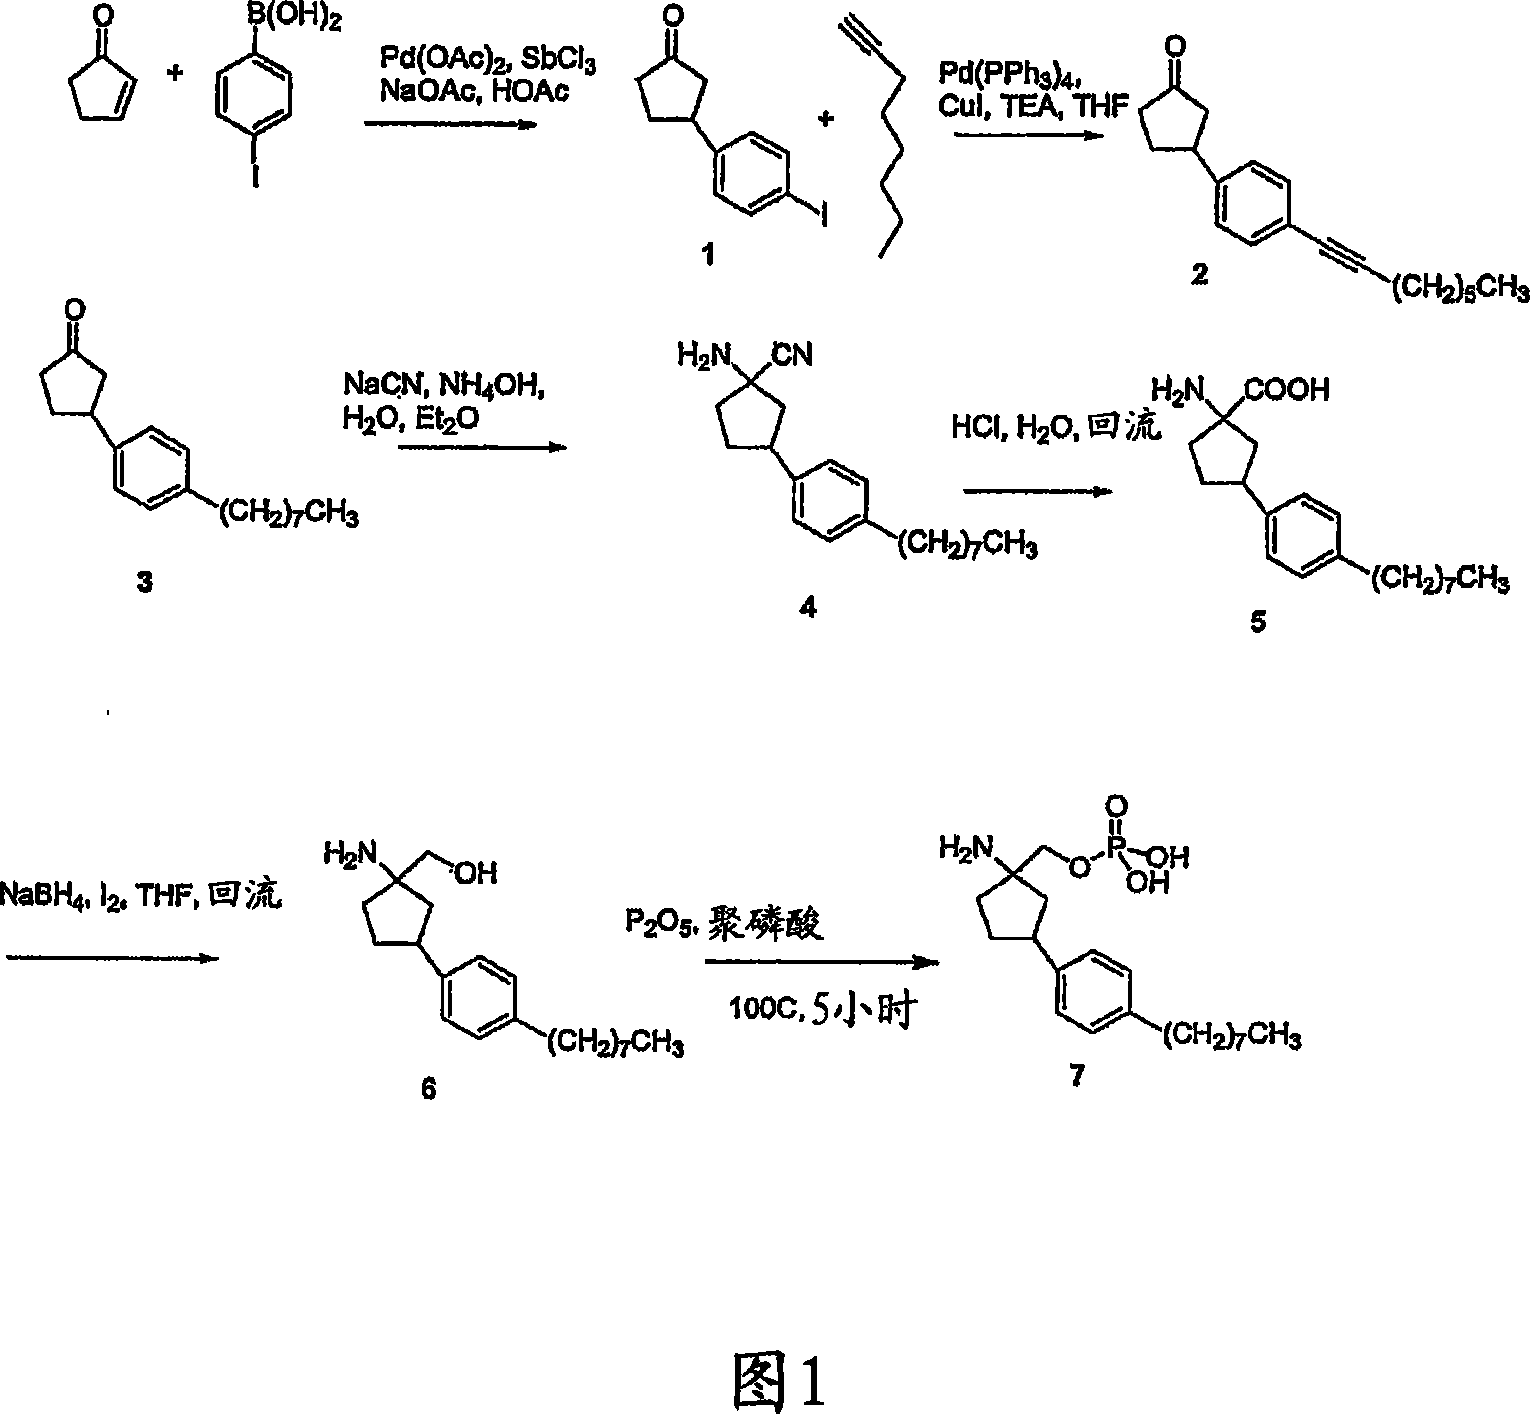 Sphingosine 1-phosphate agonists comprising cycloalkanes and 5-membered heterocycles substitued by amino and phenyl groups